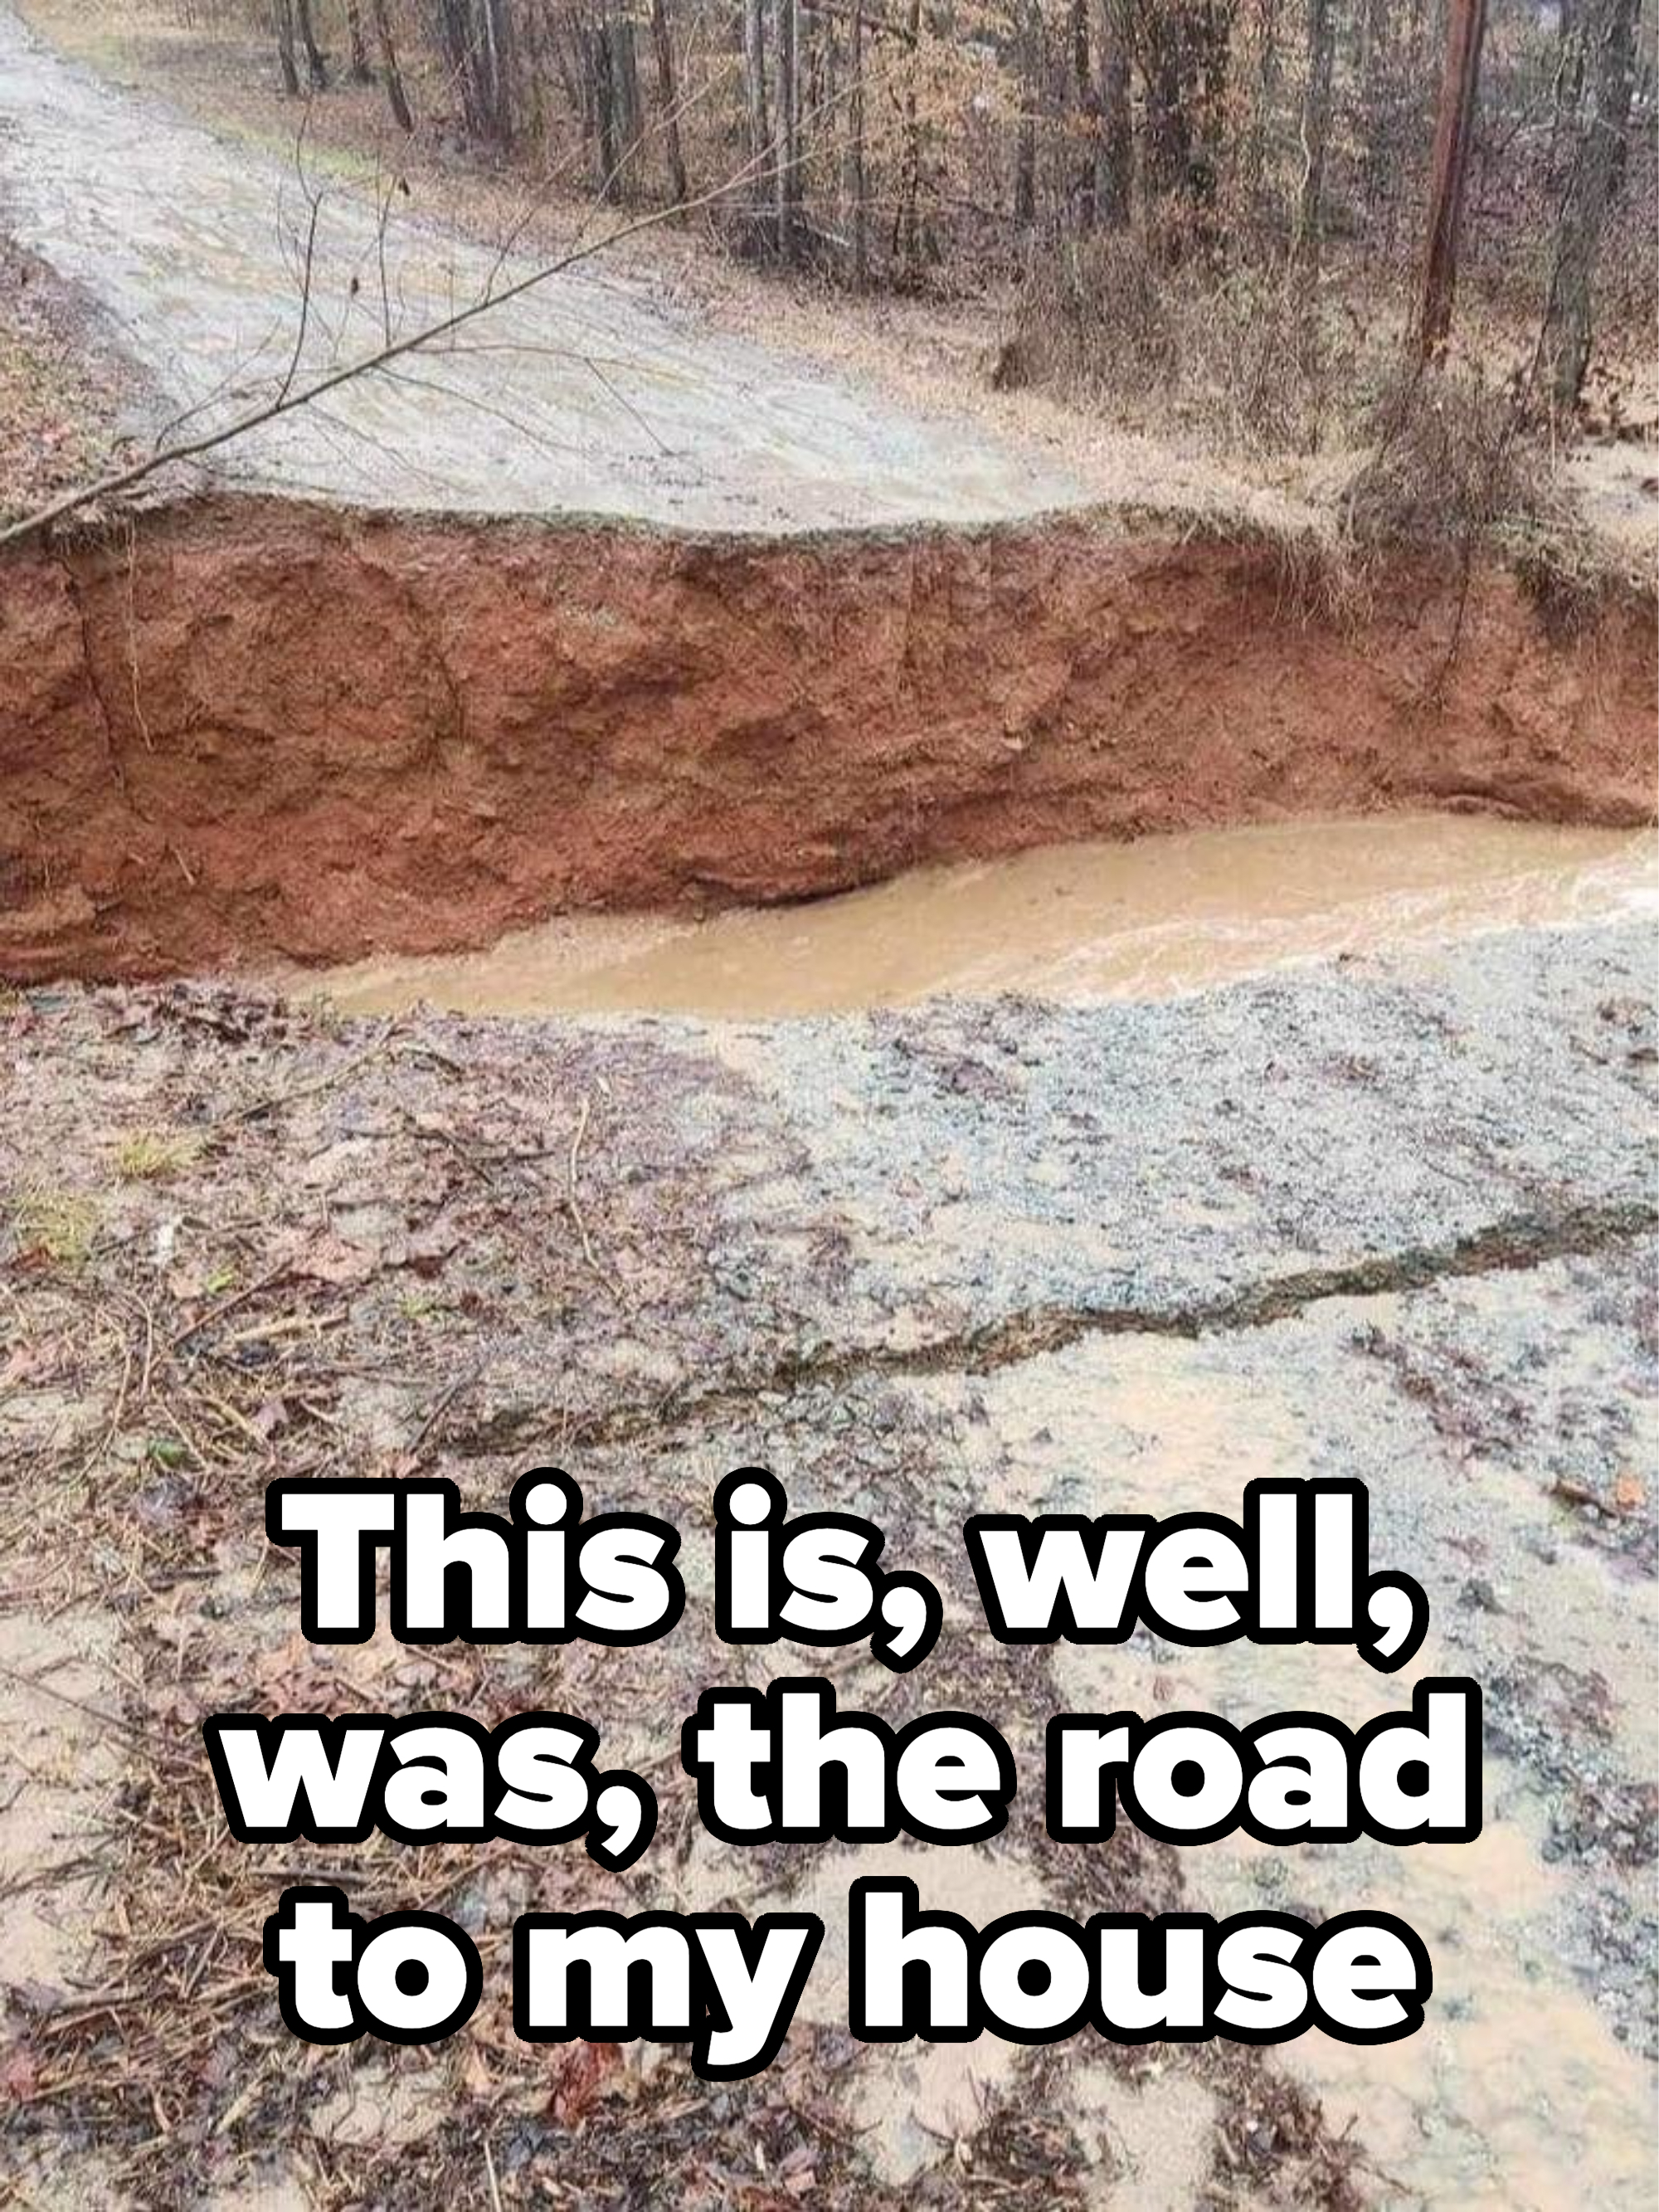 &quot;This is, well, was, the road to my house&quot;